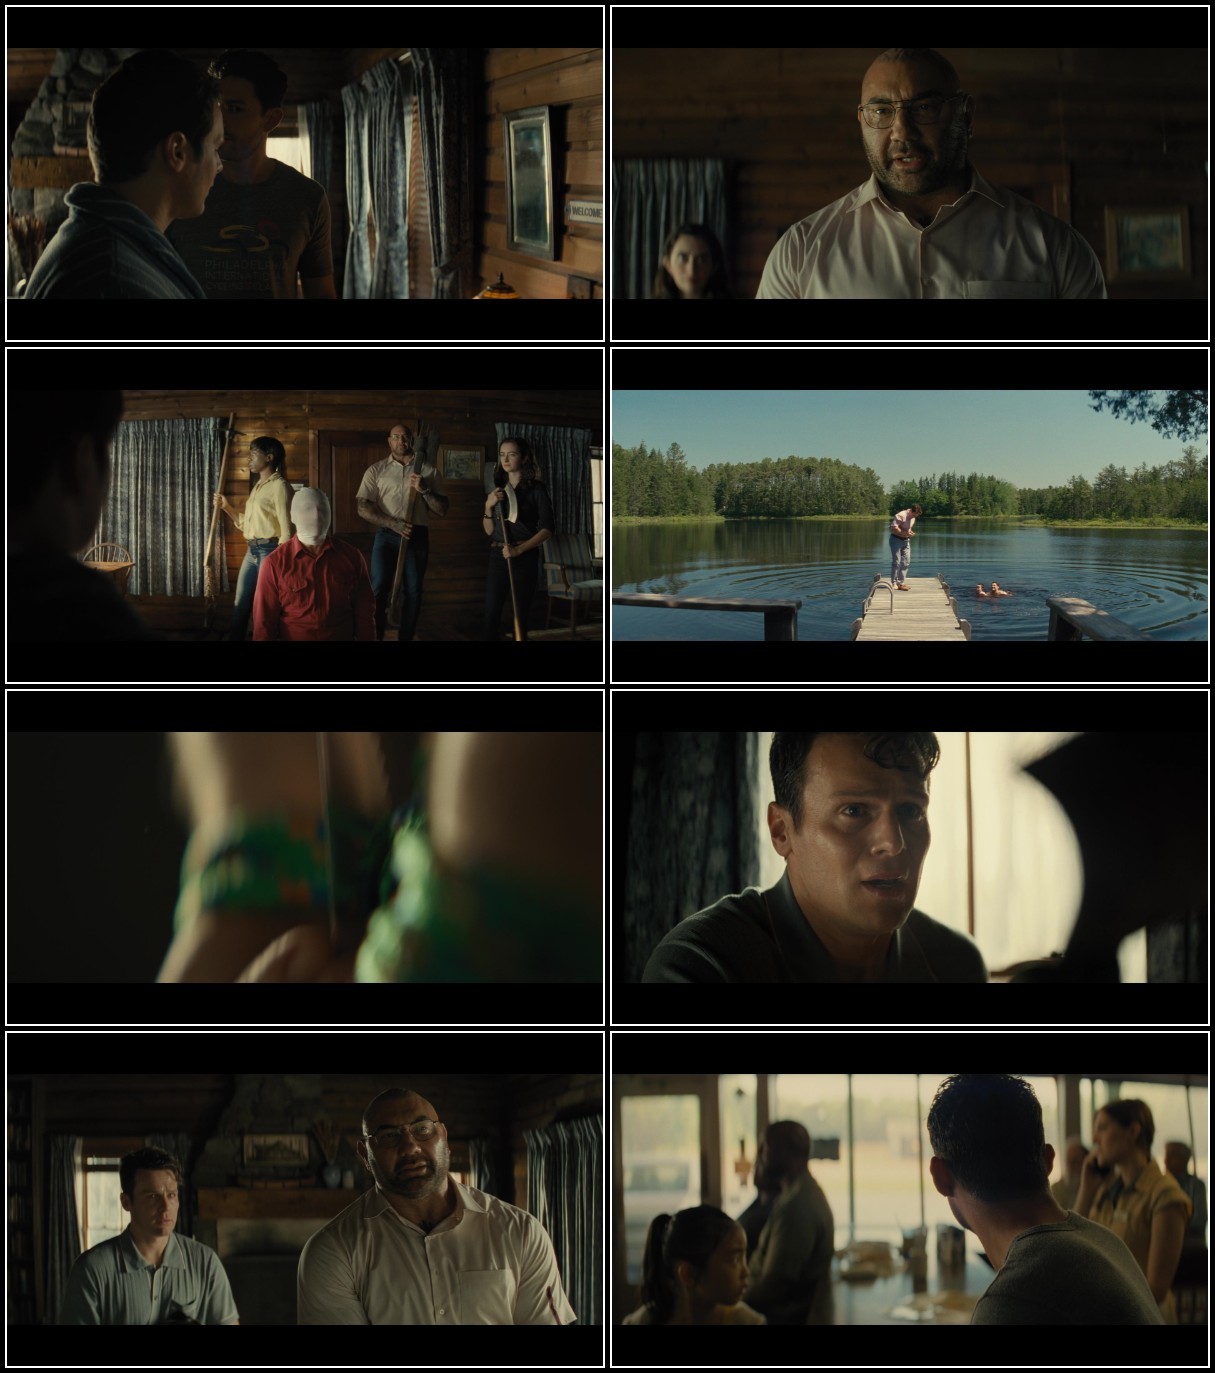 Knock at The Cabin 2023 1080p MA WEB-DL DDP5 1 Atmos H 264-SYNCED